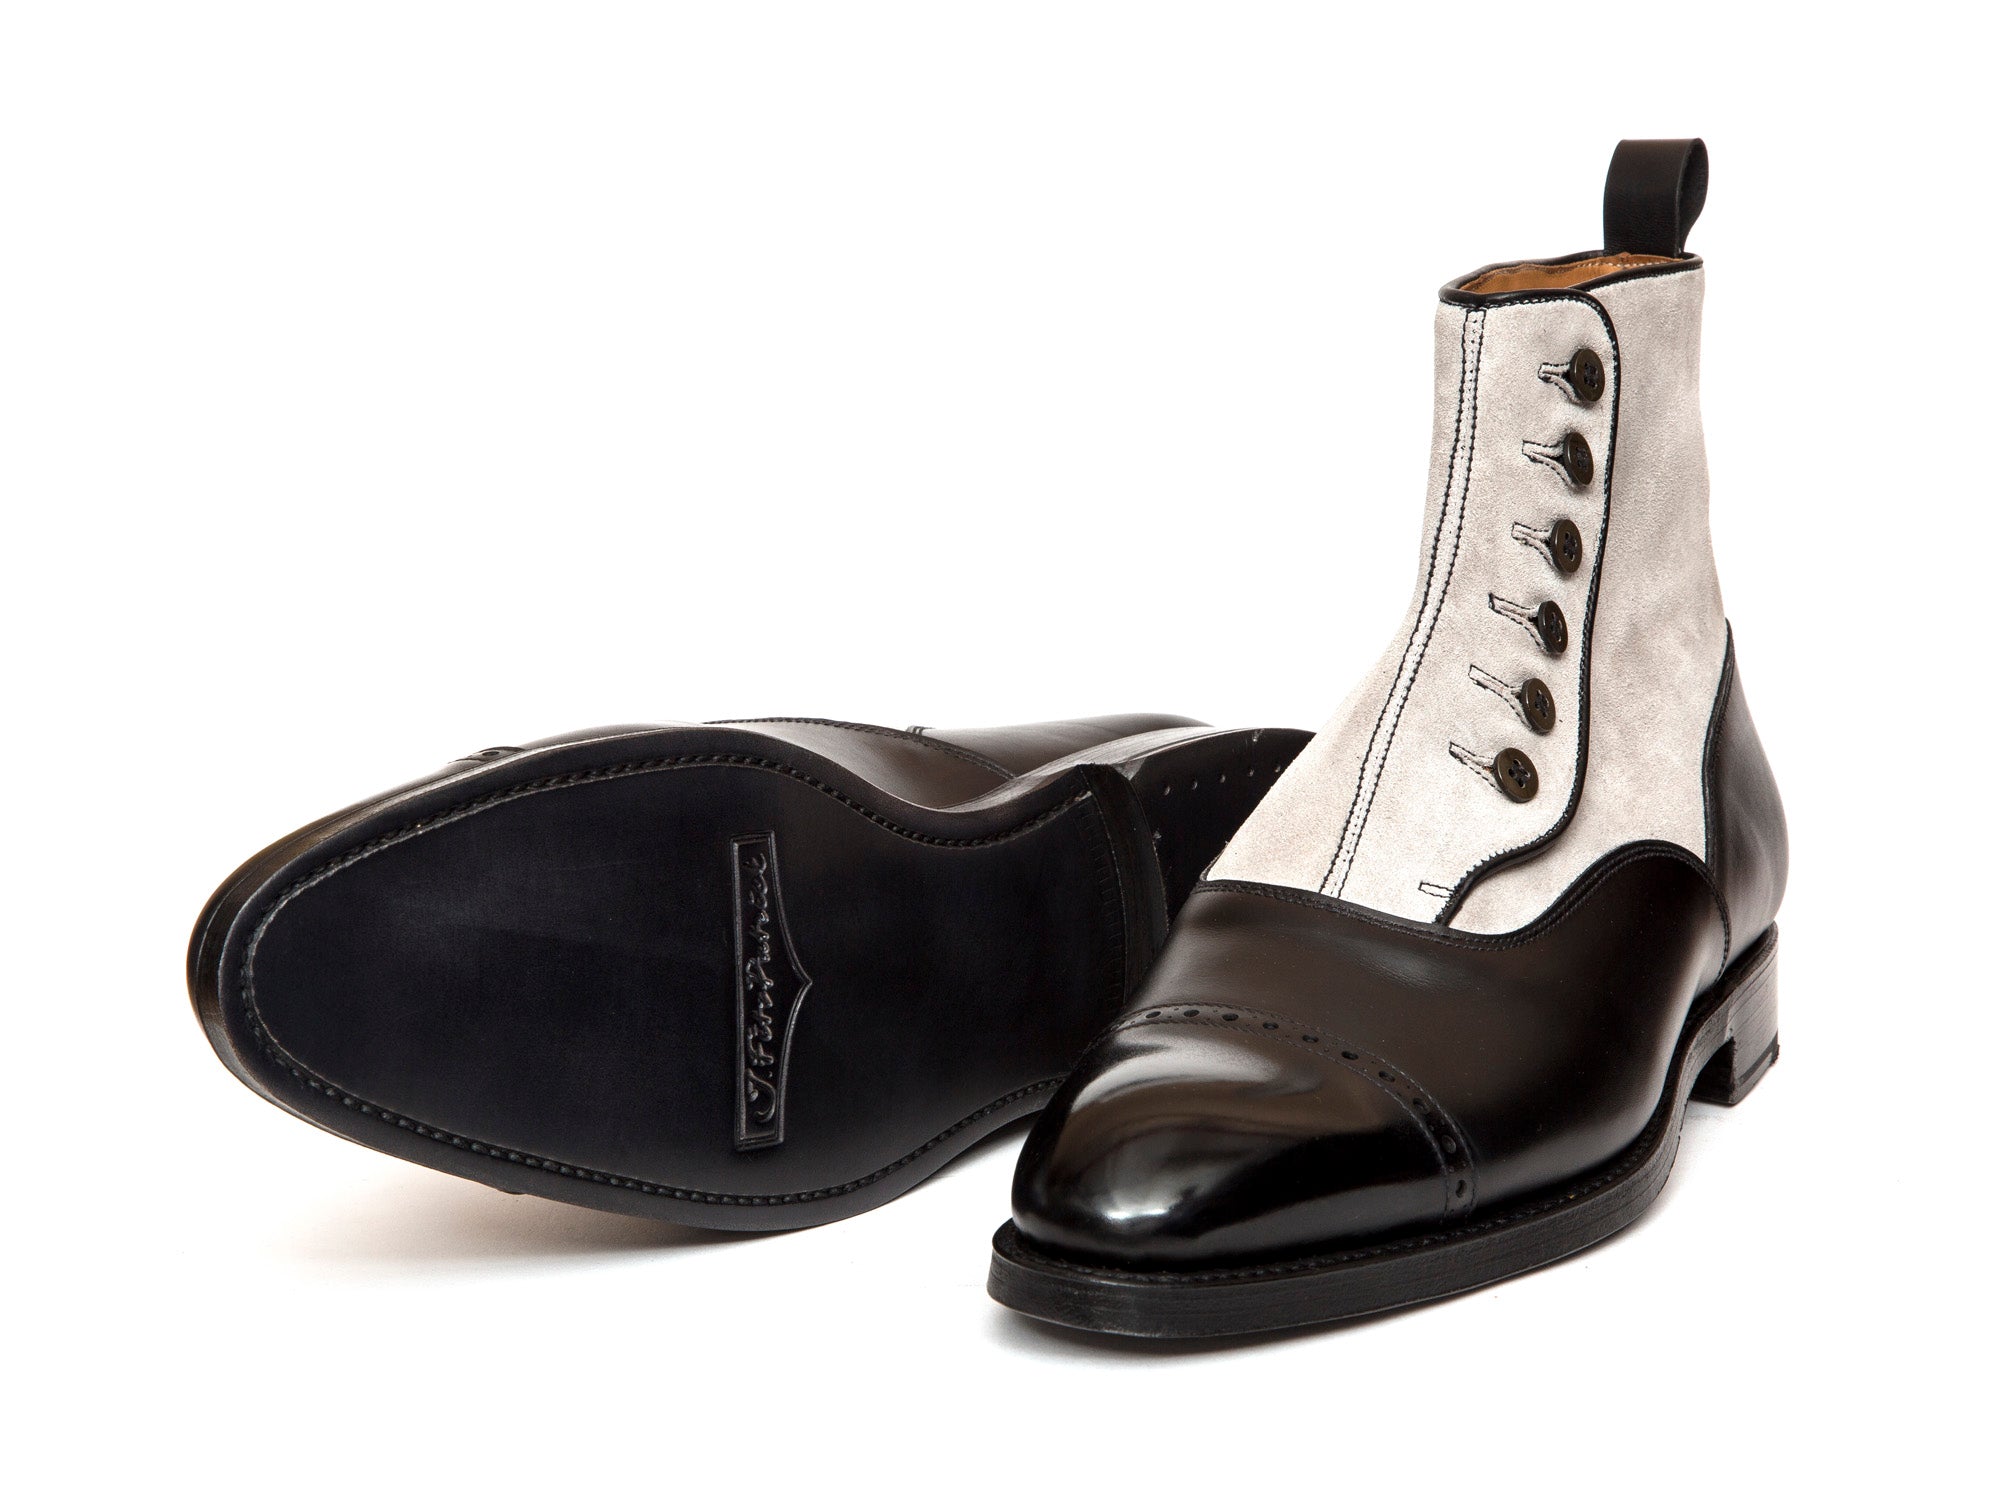 Carkeek - MTO - Black Calf / Pearl Suede - NGT Last - Double Leather Sole